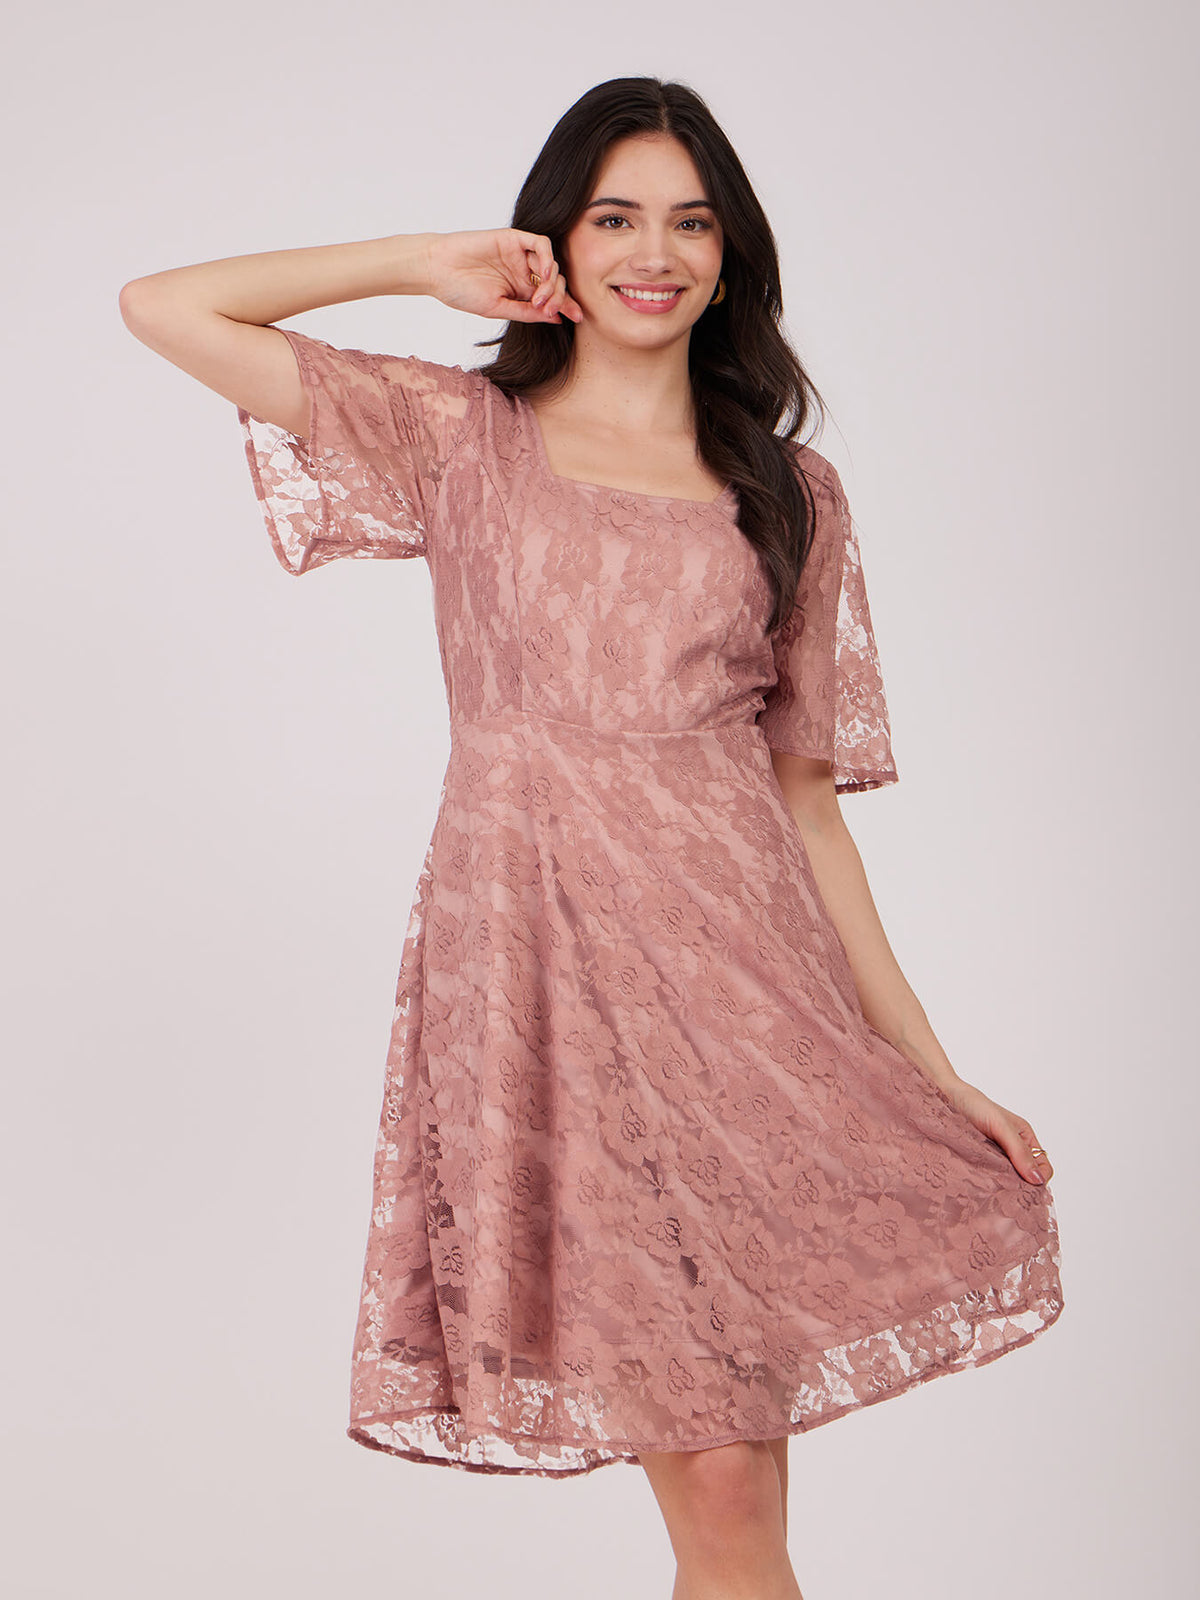 Fit And Flare Skater Dress - Dusty Pink